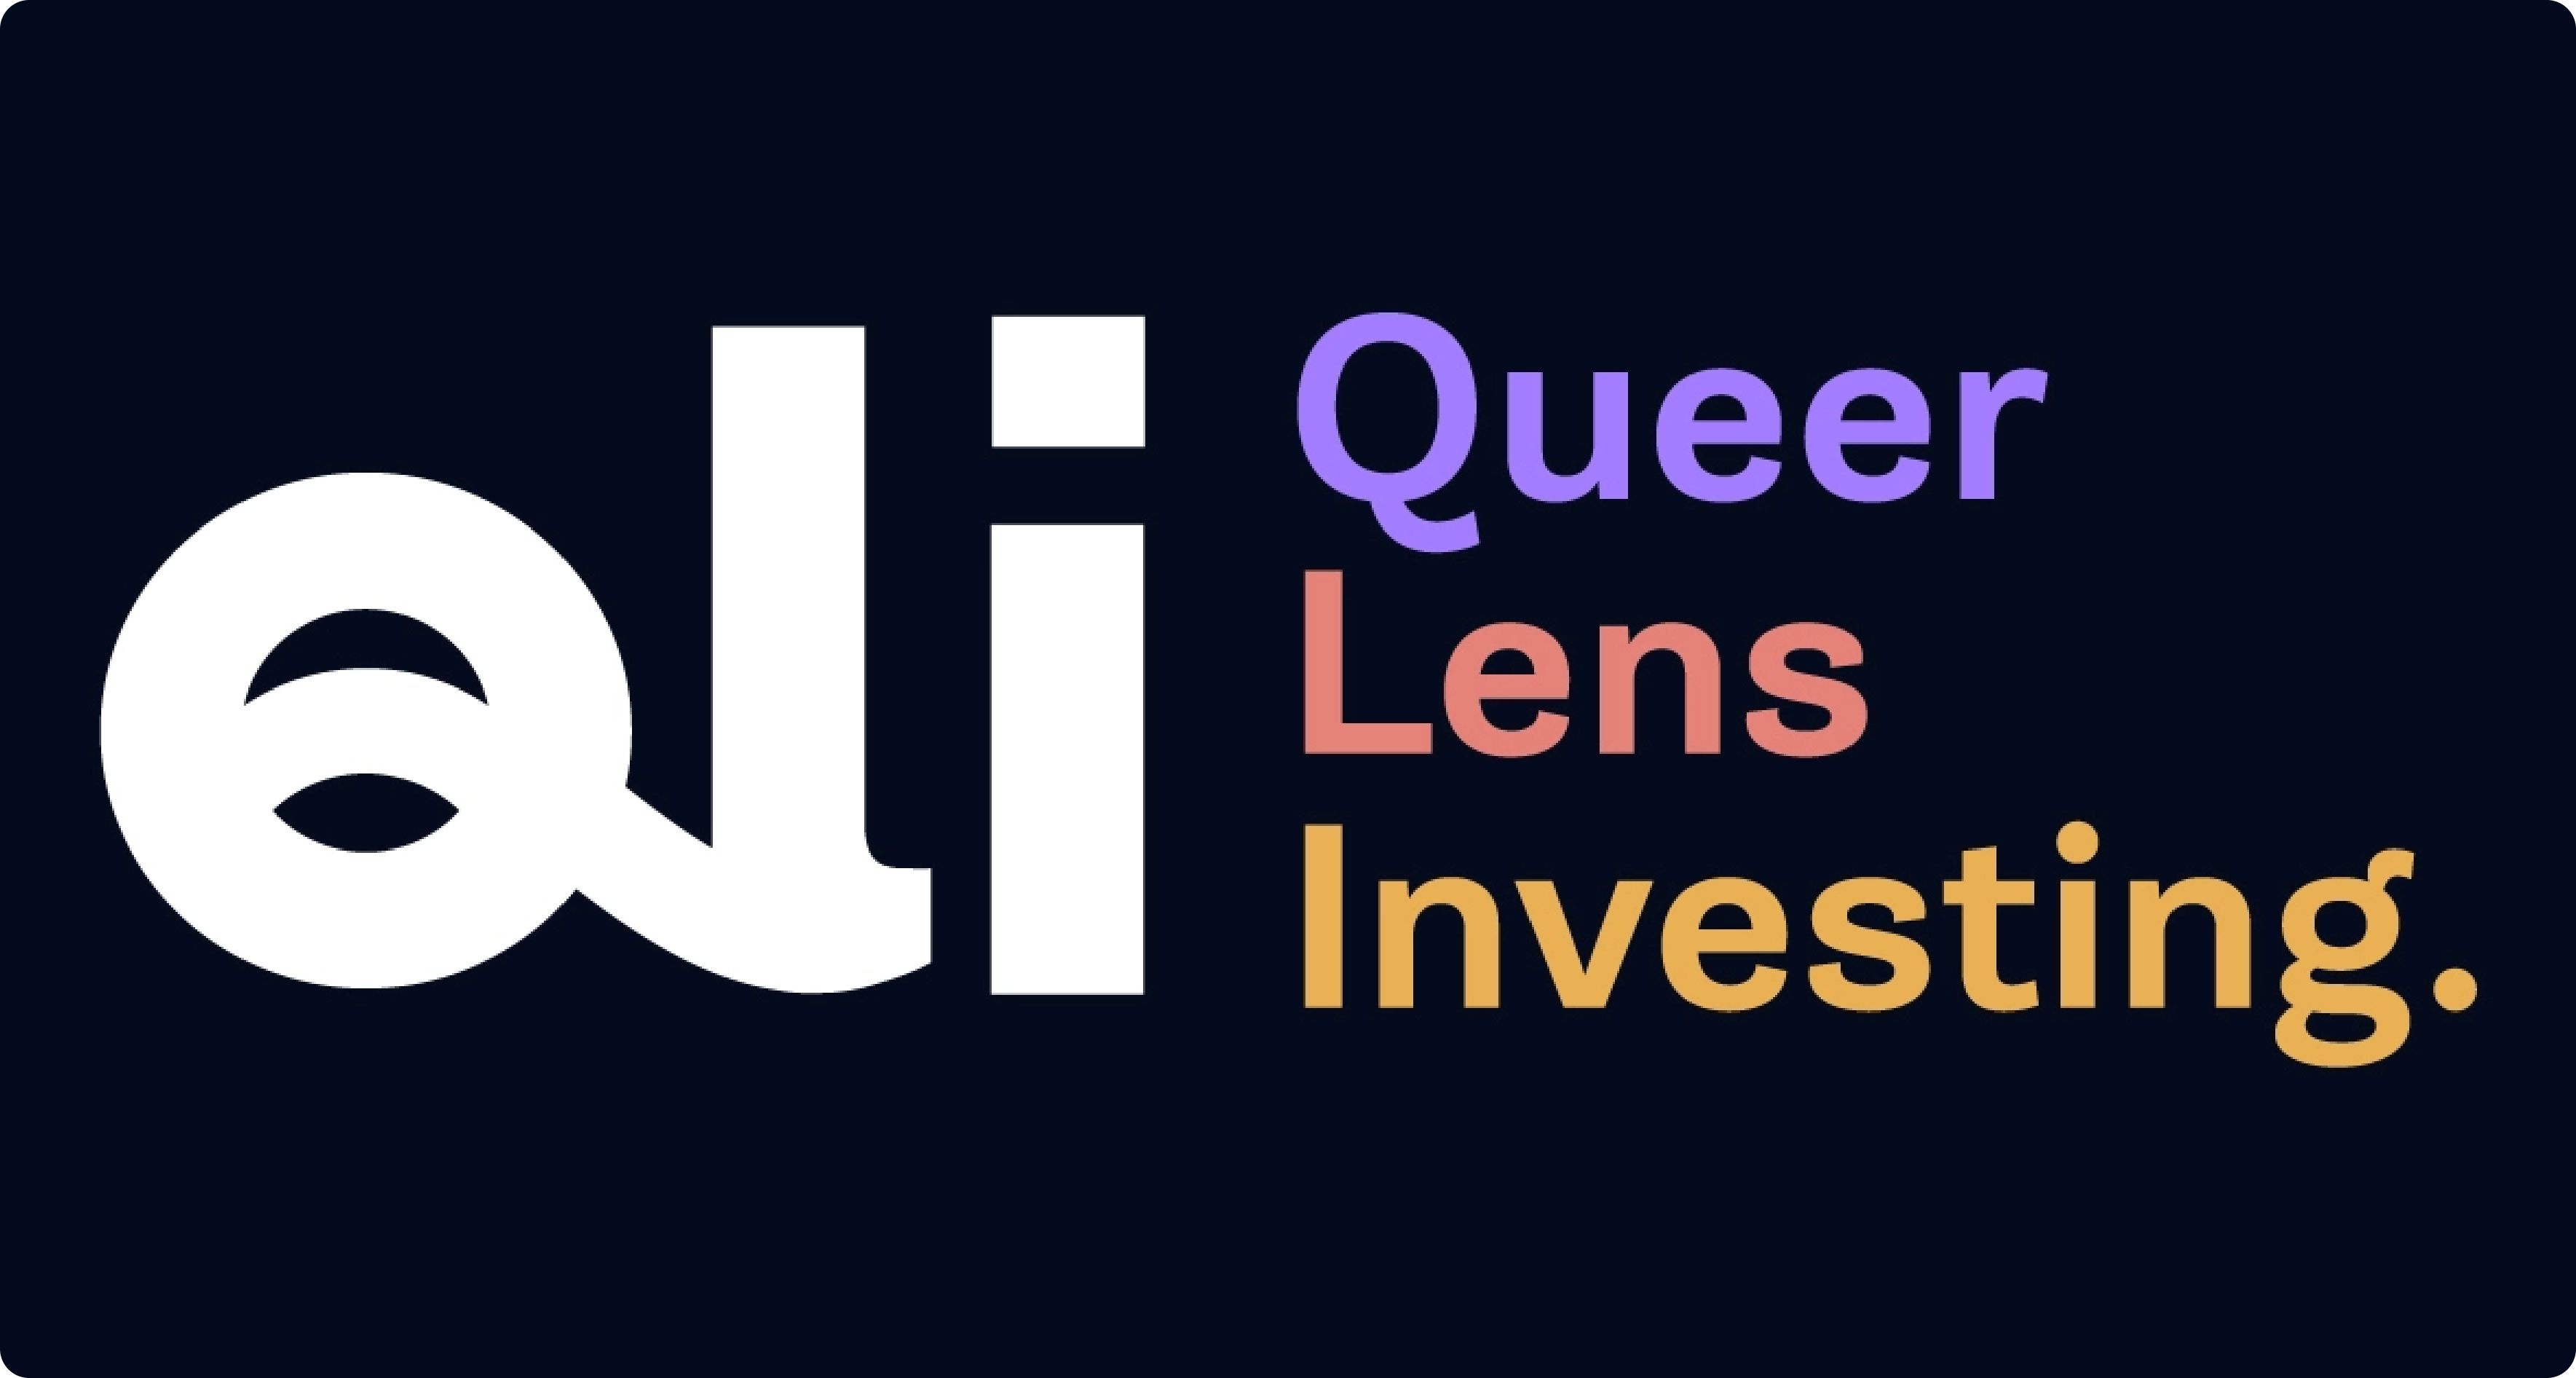 Queer Lens Investing